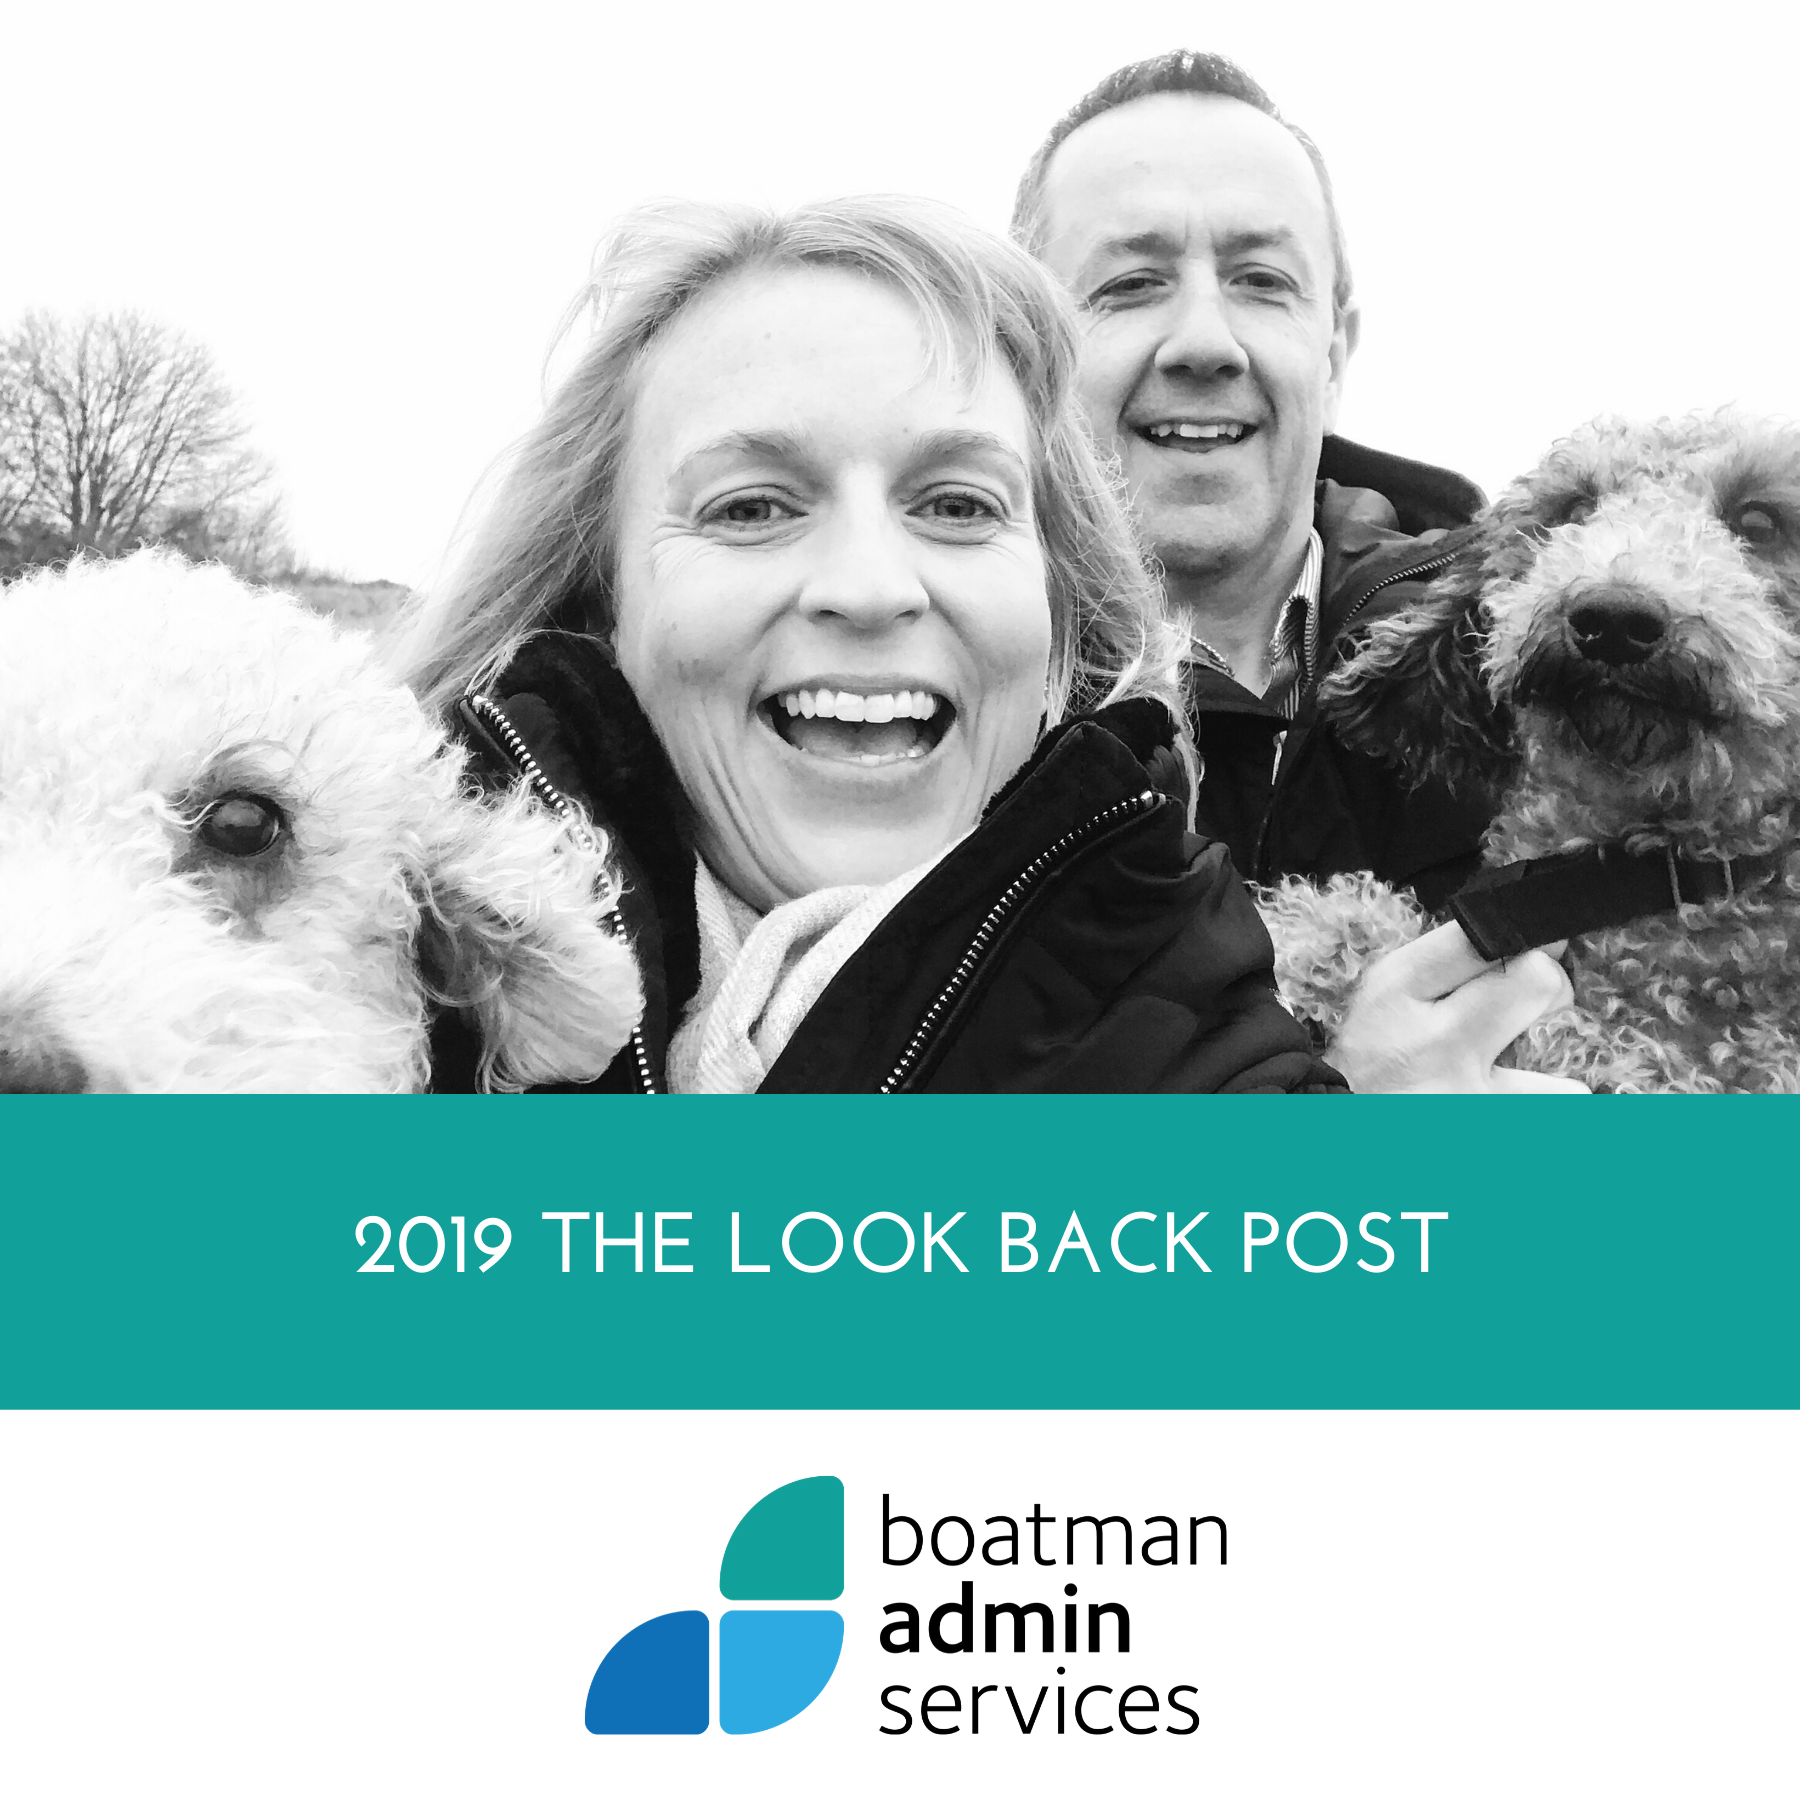 2019 - The Look Back Post